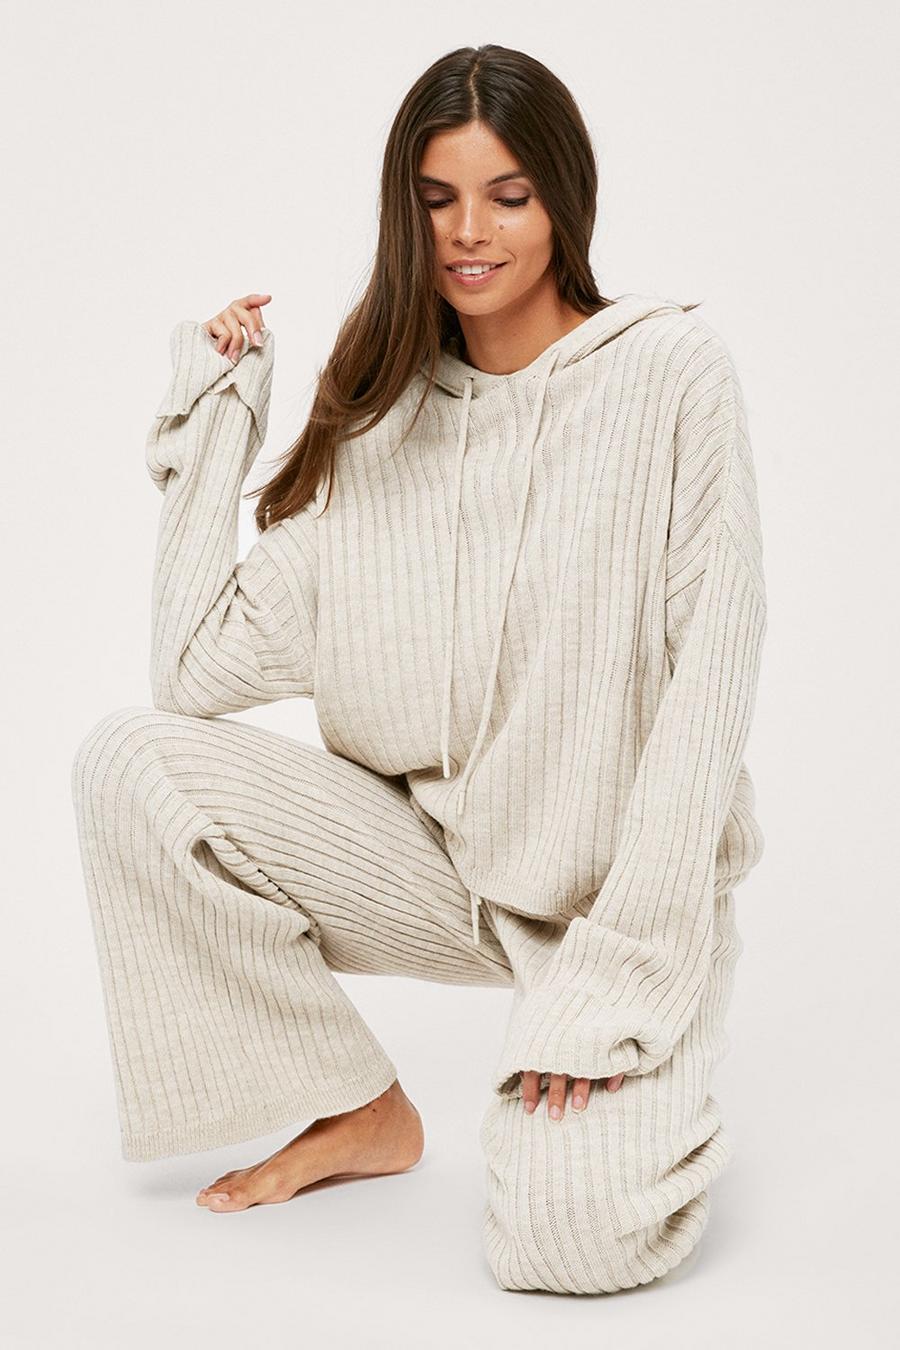 2PCS Women Co Ord STONE CABLE KNIT LOUNGEWEAR SET CASUAL COMFY KNITTED 8-14 UK 2 